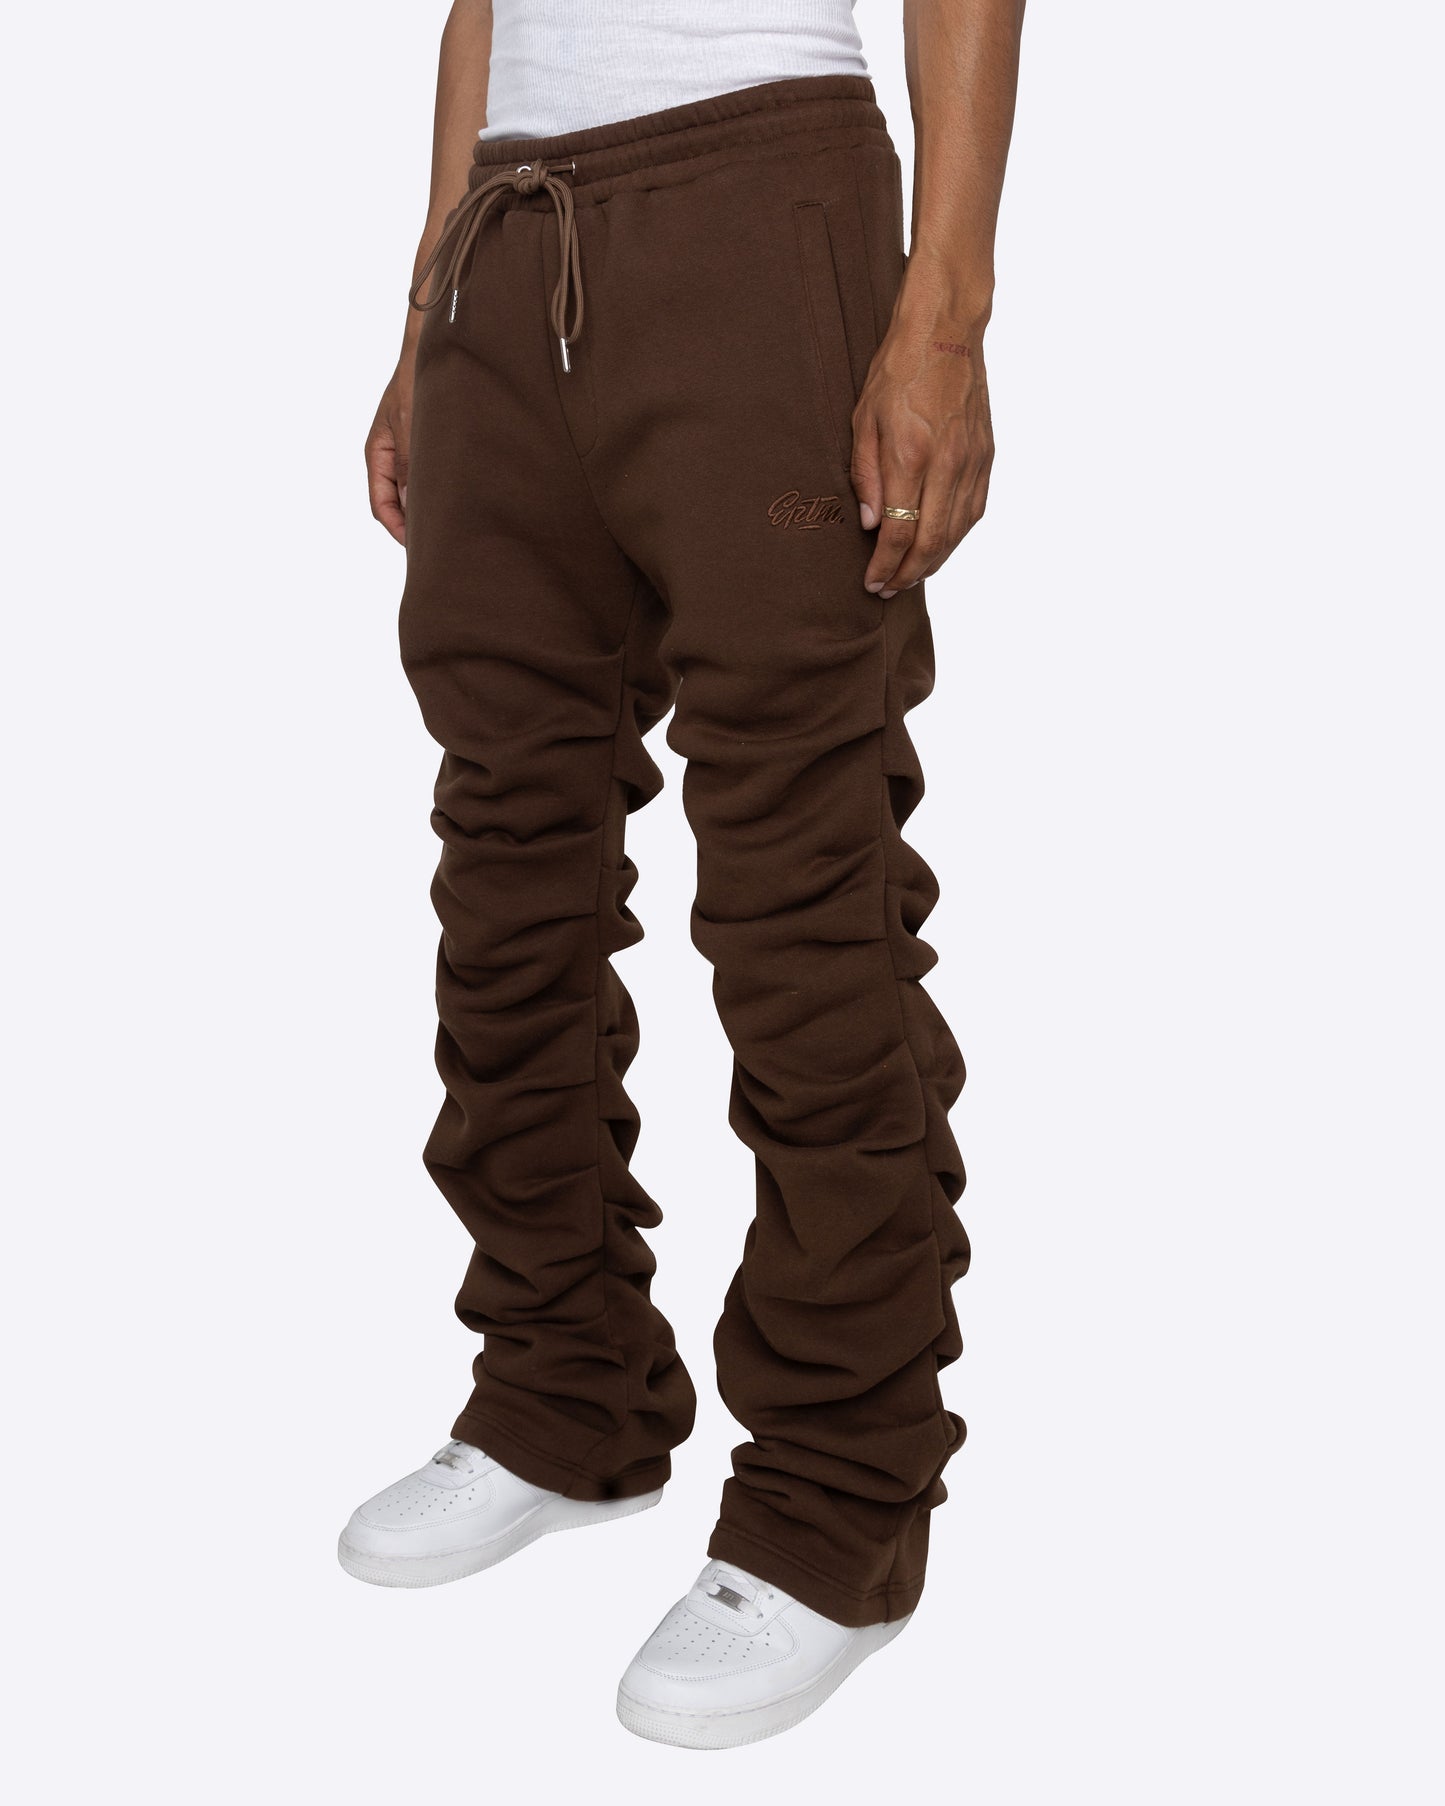 EPTM STACKED SWEATPANTS-BROWN